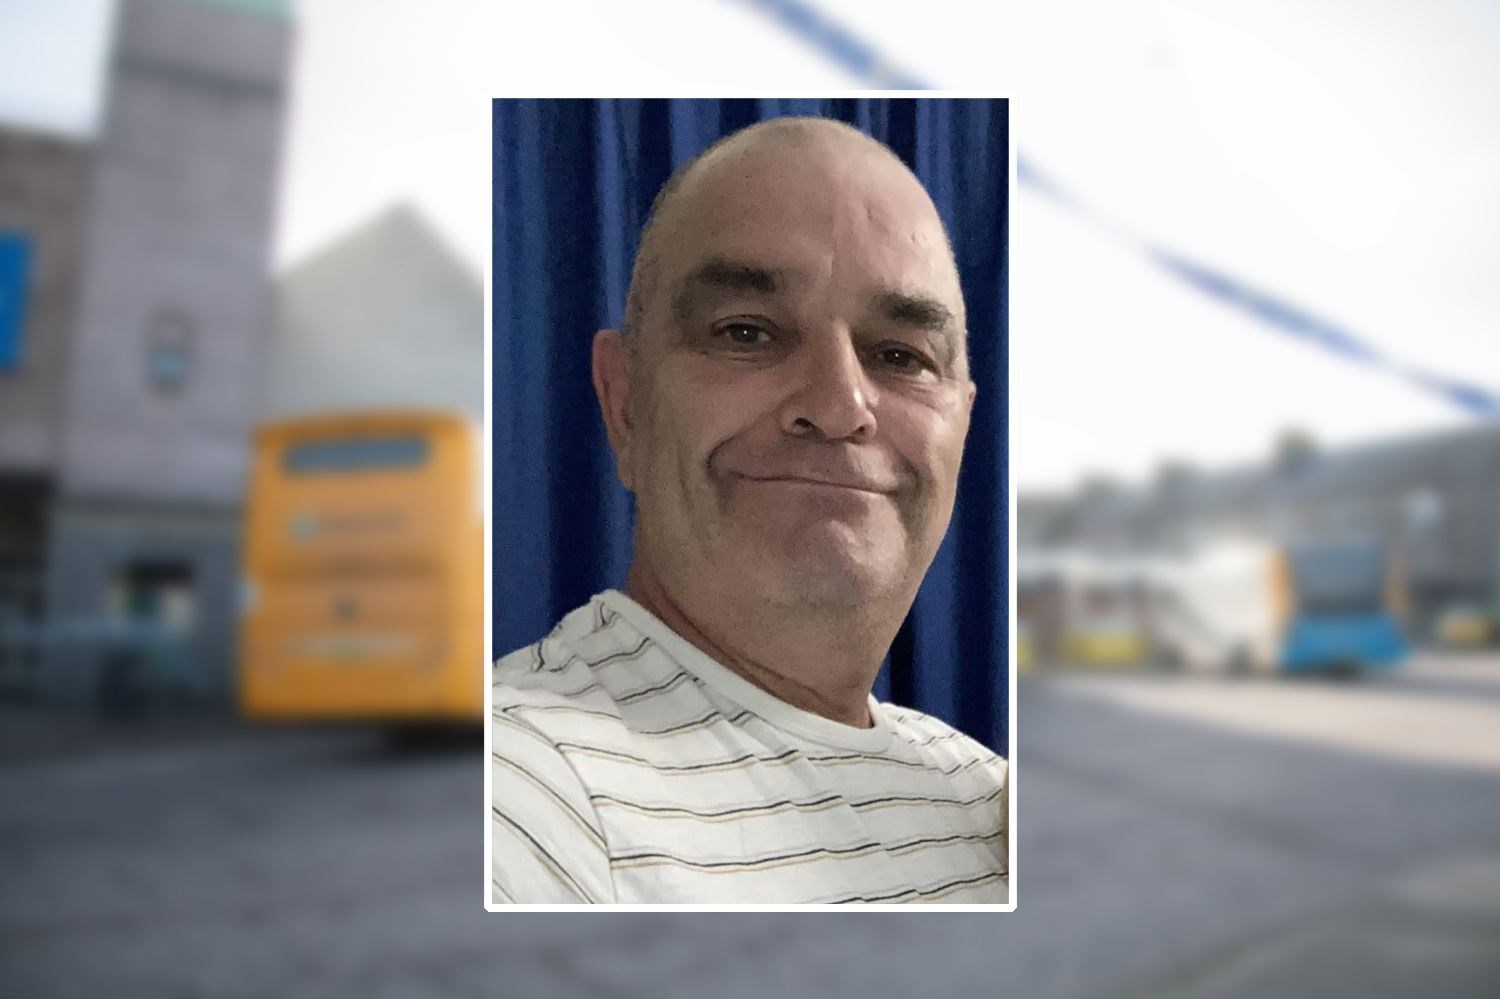 Unite is urging the Scottish Government to work with the union and bus companies to implement safety measures following the death of driver Keith Rollinson.